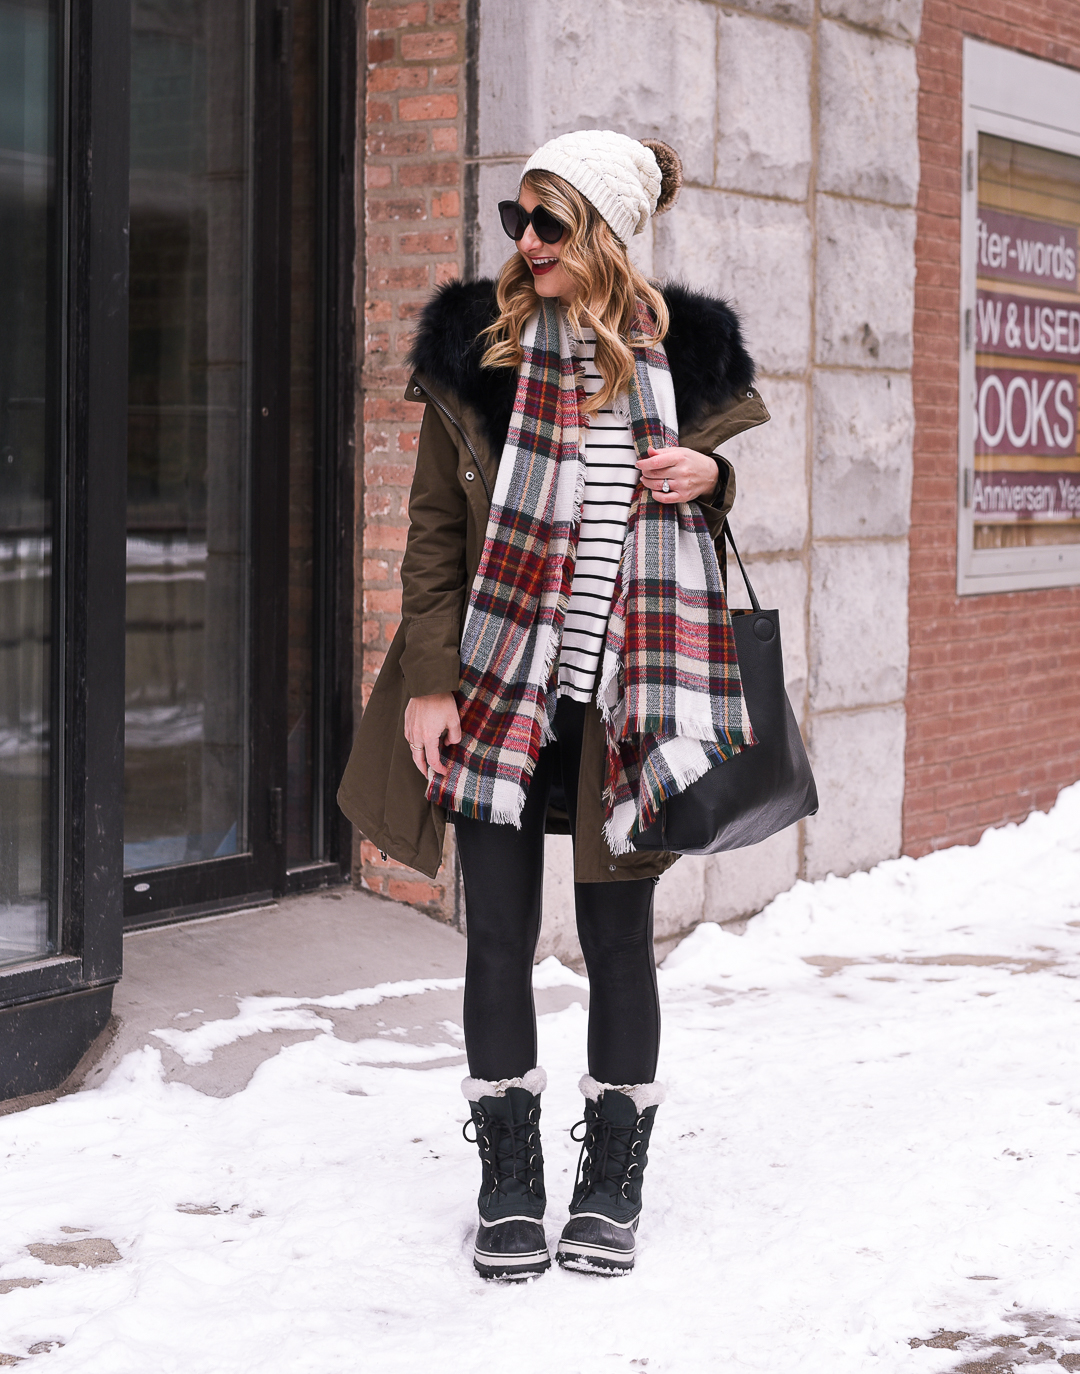 best olive jacket for winter - how to wear an olive dawn levy coat by popular Chicago fashion blogger Visions of Vogue